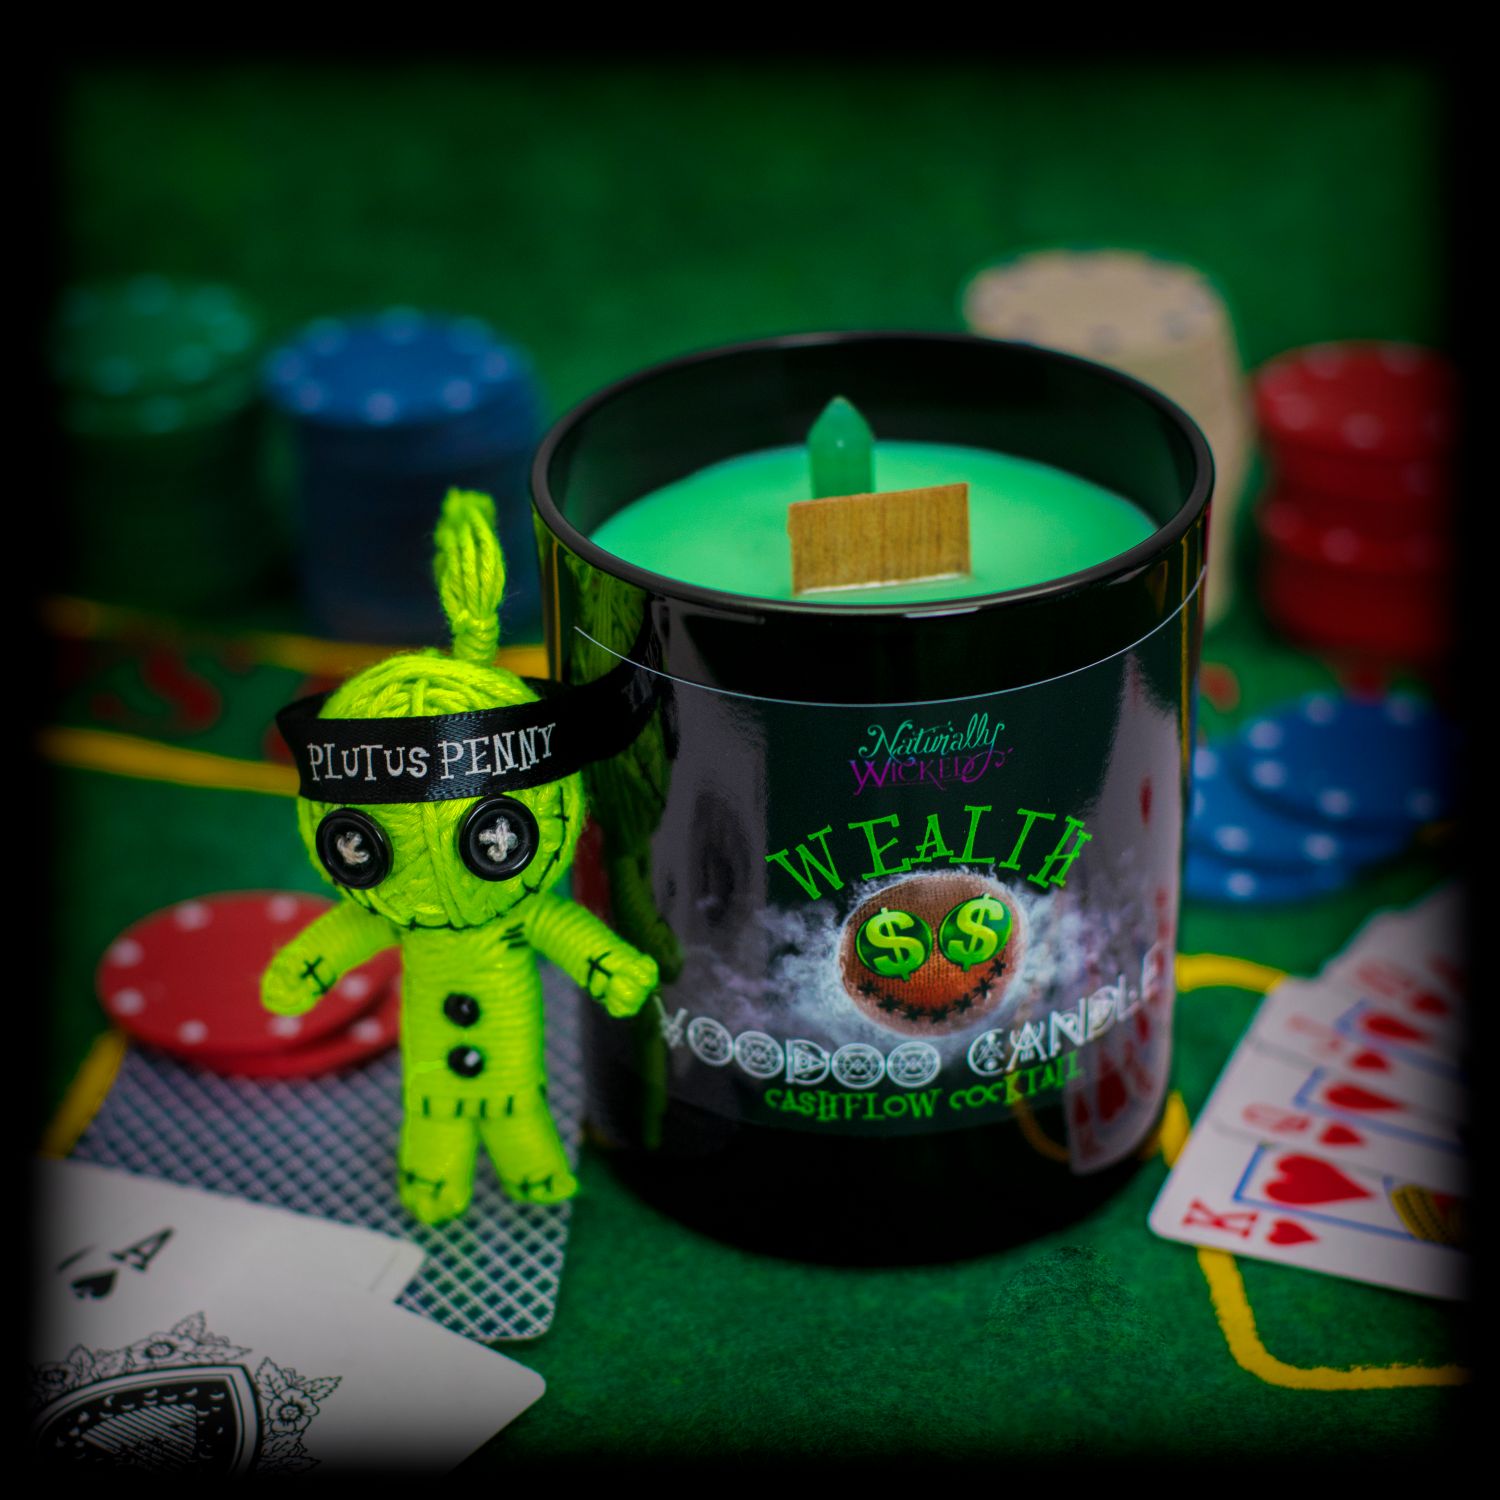 Naturally Wicked Voodoo Wealth Candle Entombed With Aventurine Crystal & Surrounded By Green Voodoo Doll, Cards & Chips